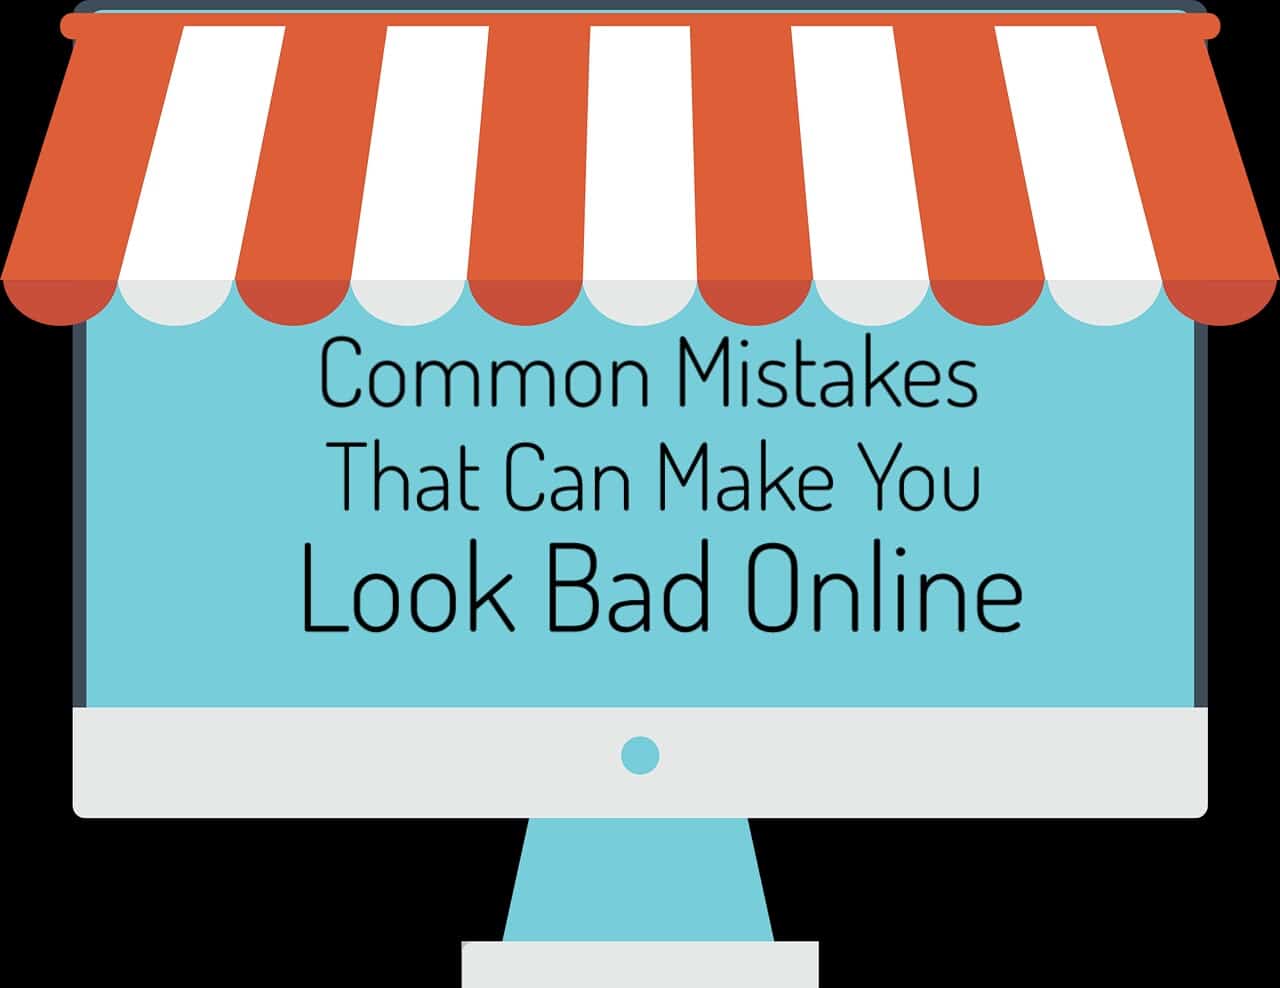 Common Mistakes That Can Make You Look Bad Online